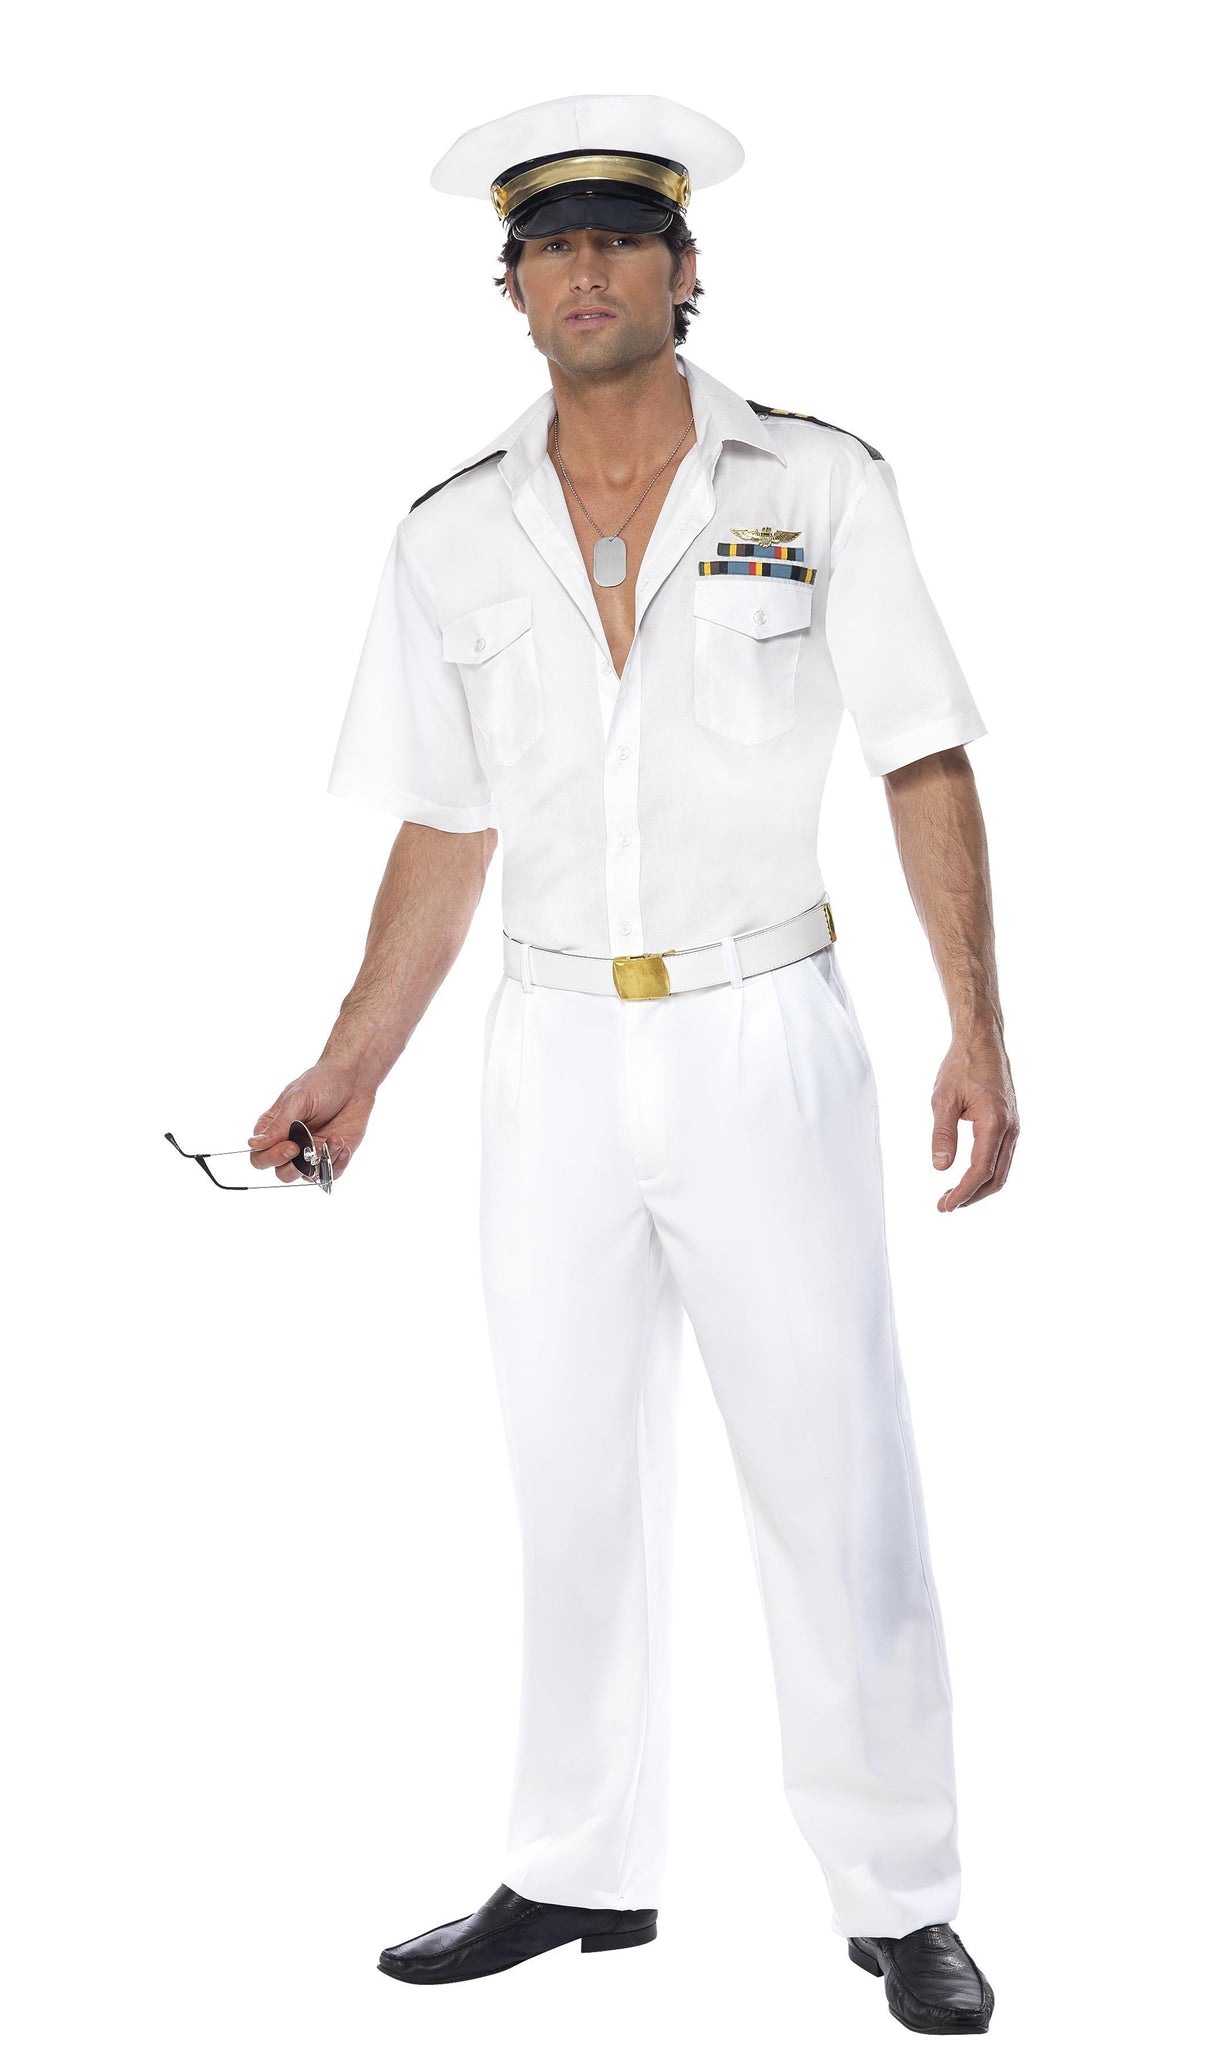 White Top Gun captain costume with hat